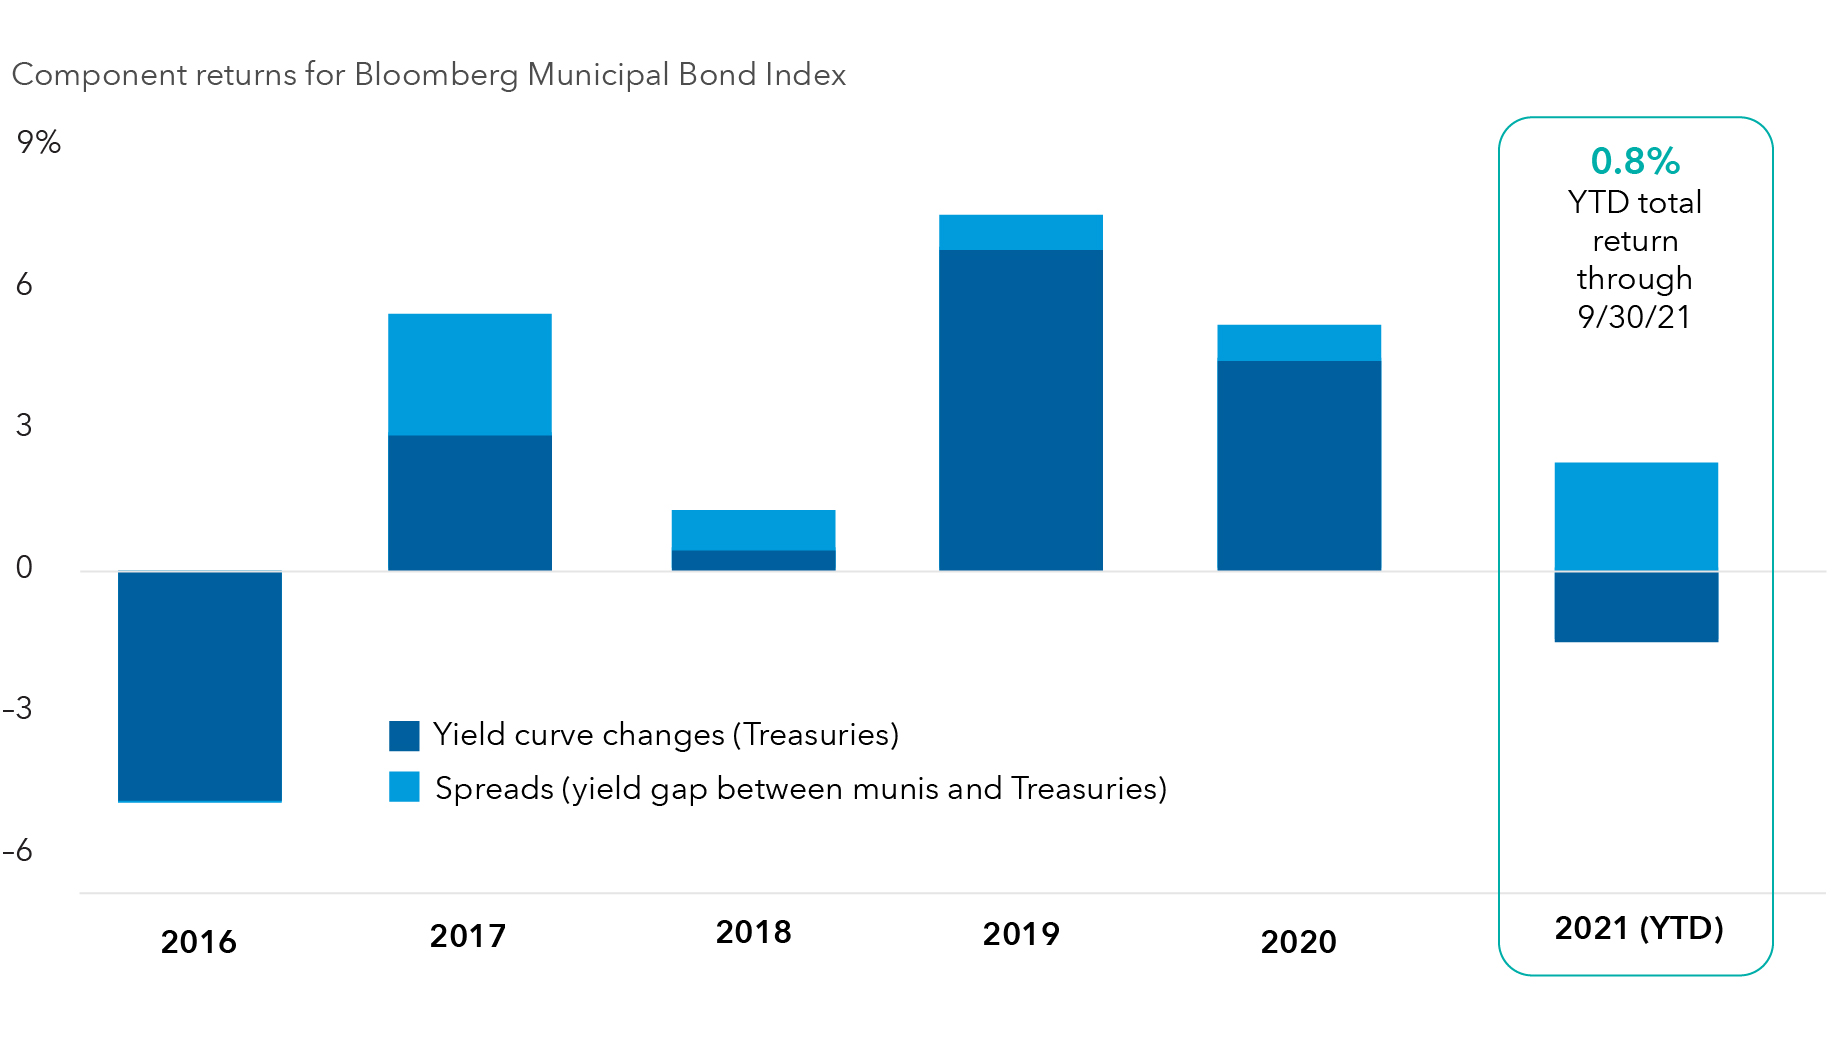 Bar chart showing components of returns for Bloomberg Municipal Bond Index for each calendar year since 2016, through year-to-date 2021, as of September 30. Total return, and components attributable to Treasury yield curve changes and spreads, which measure the yield gap between munis and Treasuries were, respectively: 0.8%, negative 1.5%, 2.3% for year-to-date 2021; 5.2%, 4.5%, 0.8% for 2020; 7.5%, 6.8%, 0.7% for 2019; 1.3%, 0.4%, 0.9% for 2018; 5.4%, 2.9%, 2.6% for 2017; negative 4.9%, negative 4.9%, negative 0.1% for 2016.